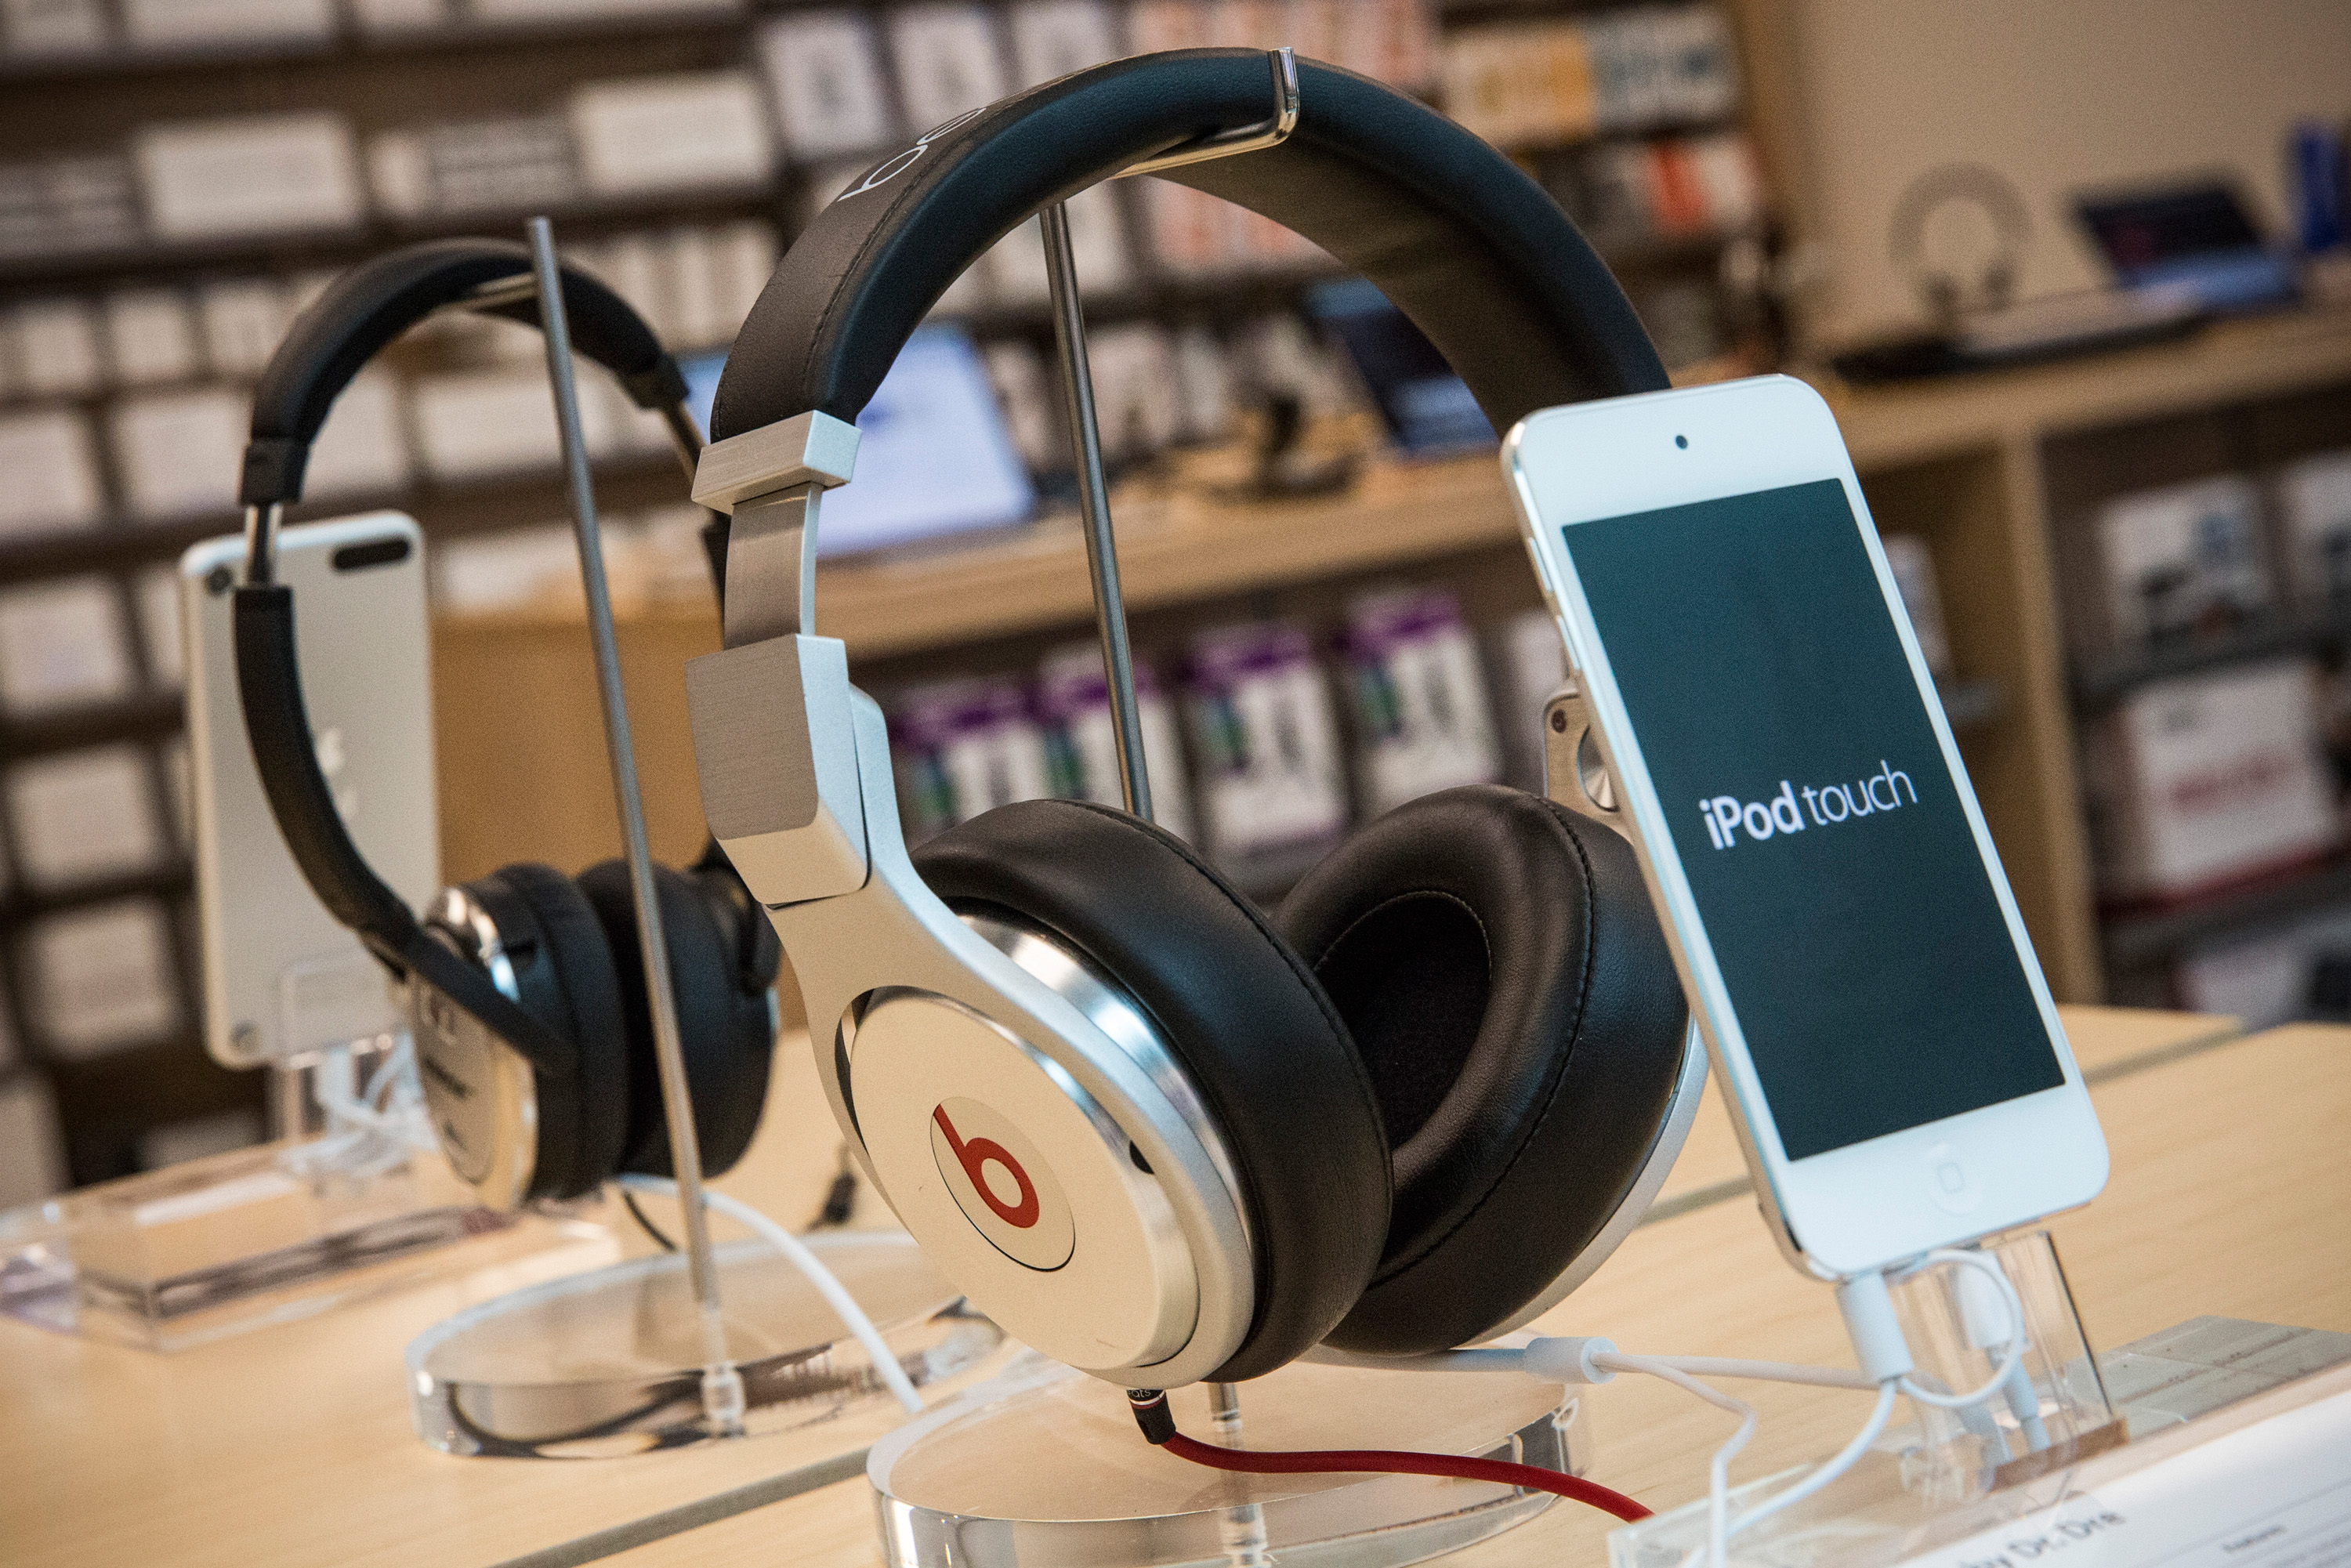 Beats headphones are sold along side iPods in an Apple store on May 9, 2014 in New York City. (Andrew Burton&mdash;Getty Images)